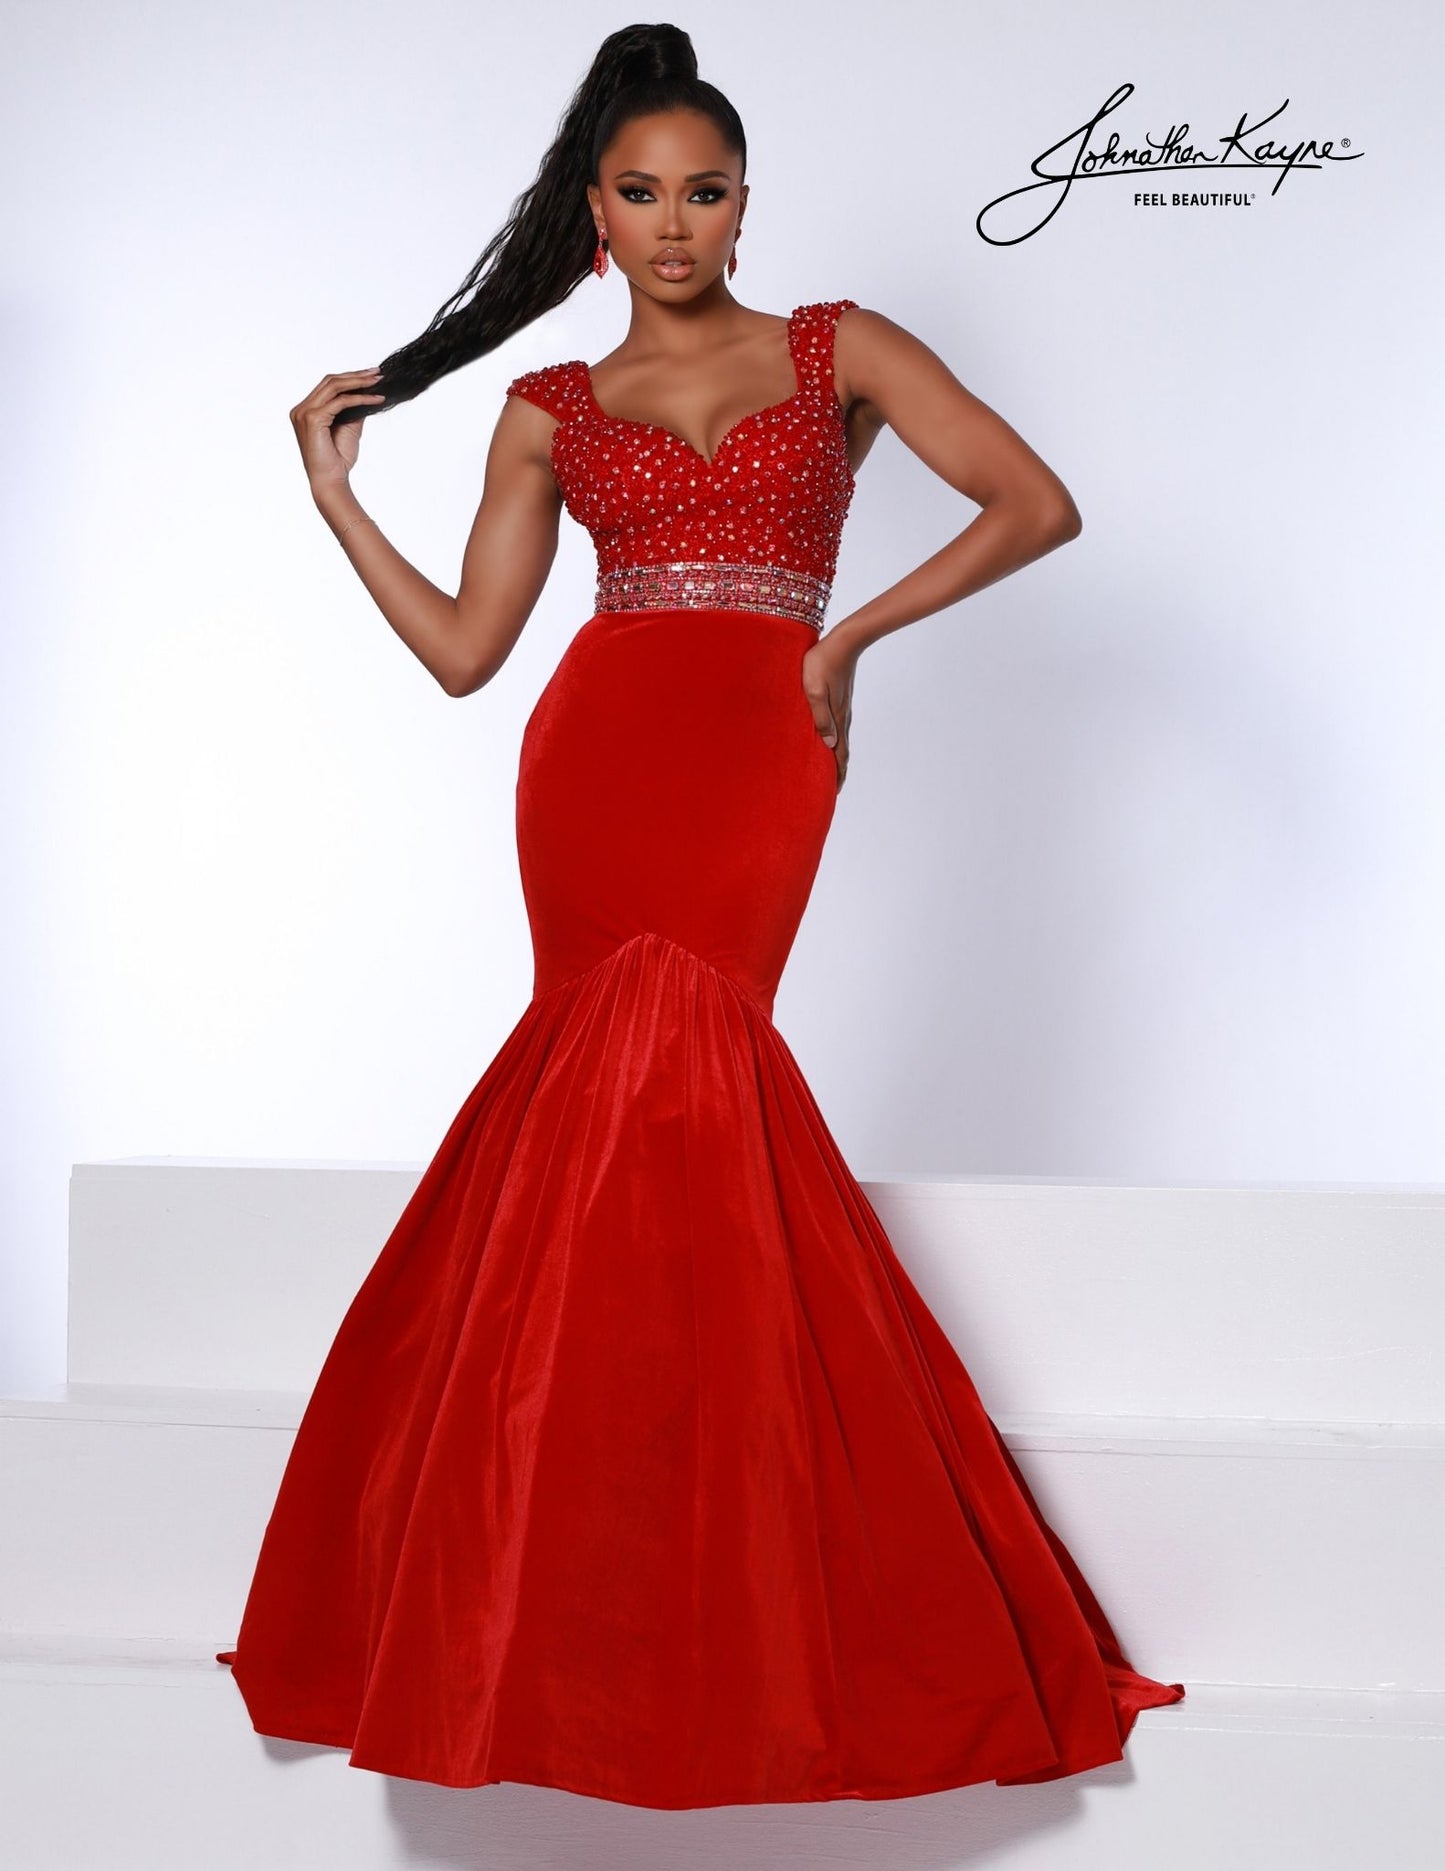 Introducing the Johnathan Kayne 2724 dress; a stunning evening gown featuring a fitted velvet bodice and mermaid skirt. Luxuriously crafted with a hot stone embellishment, it is sure to turn heads at any special event. The look is finished with an eye-catching crystal belt for a show-stopping finish.  Sizes: 00,0,2,4,6,8,10,12,14,16  Colors: Black, Red, White, Royal 